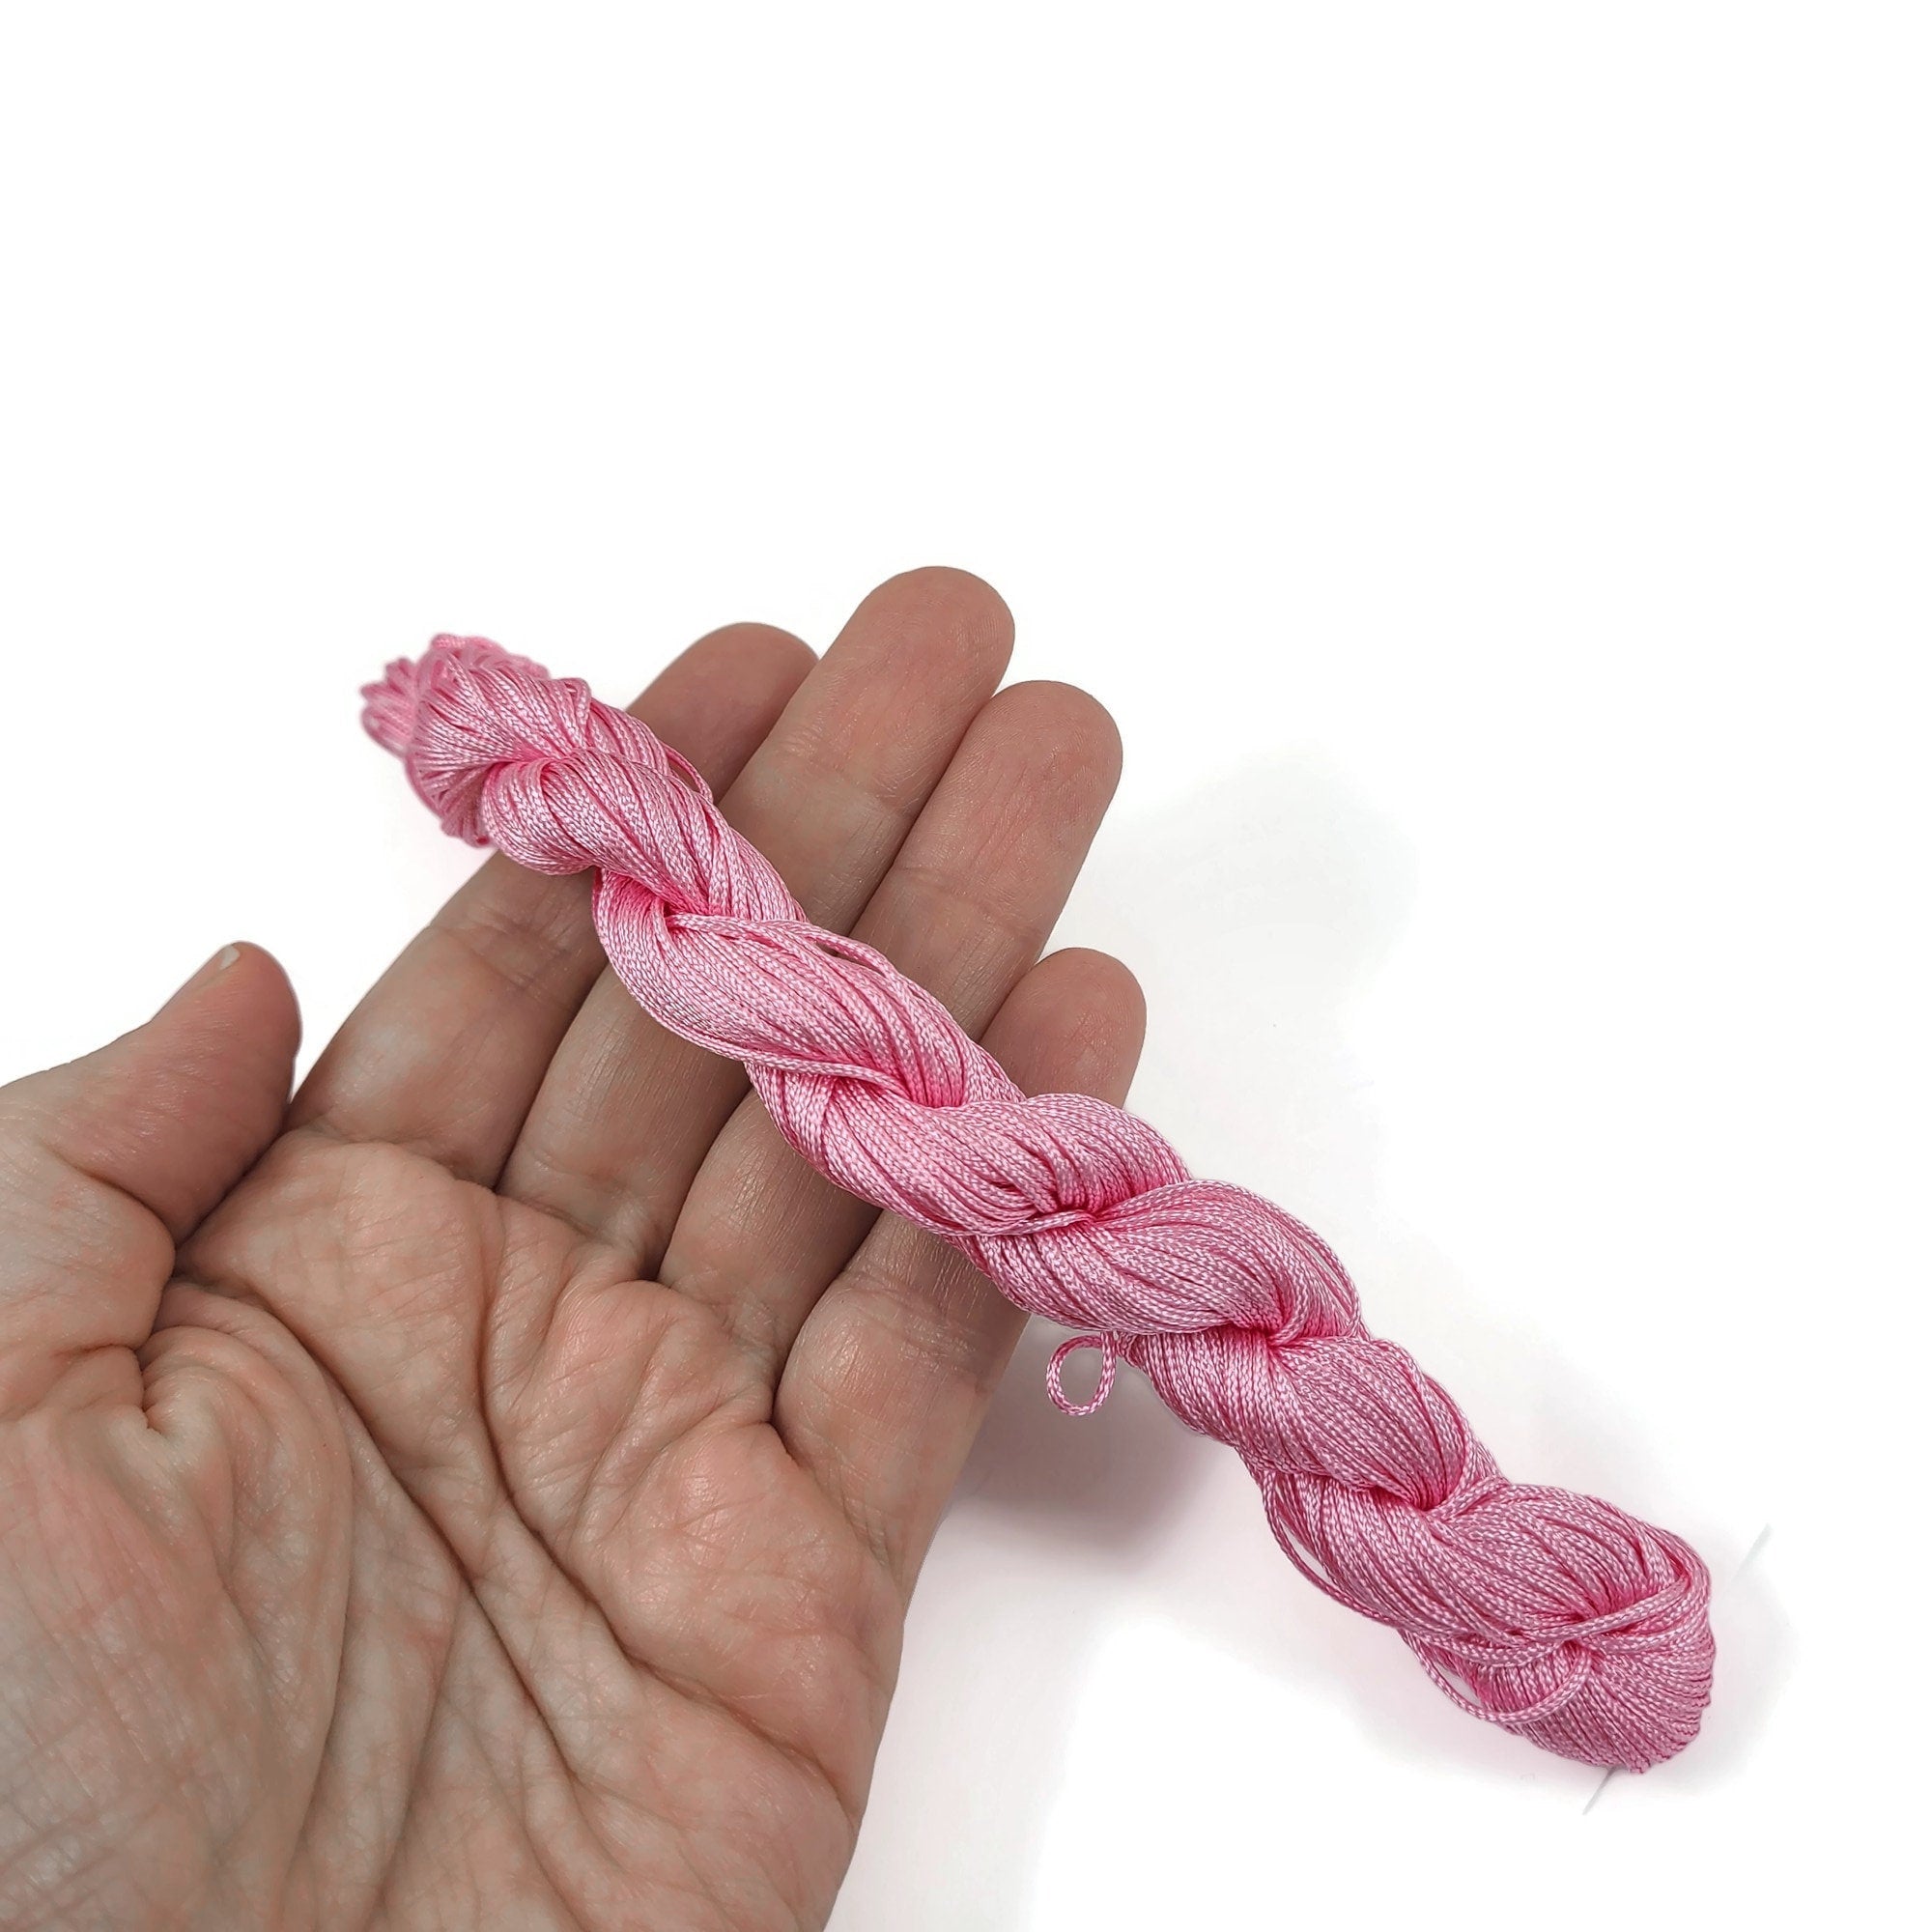 1mm nylon cord - 22 meters / 72 ft - Knotting string, Macrame thread, Jewelry making supplies